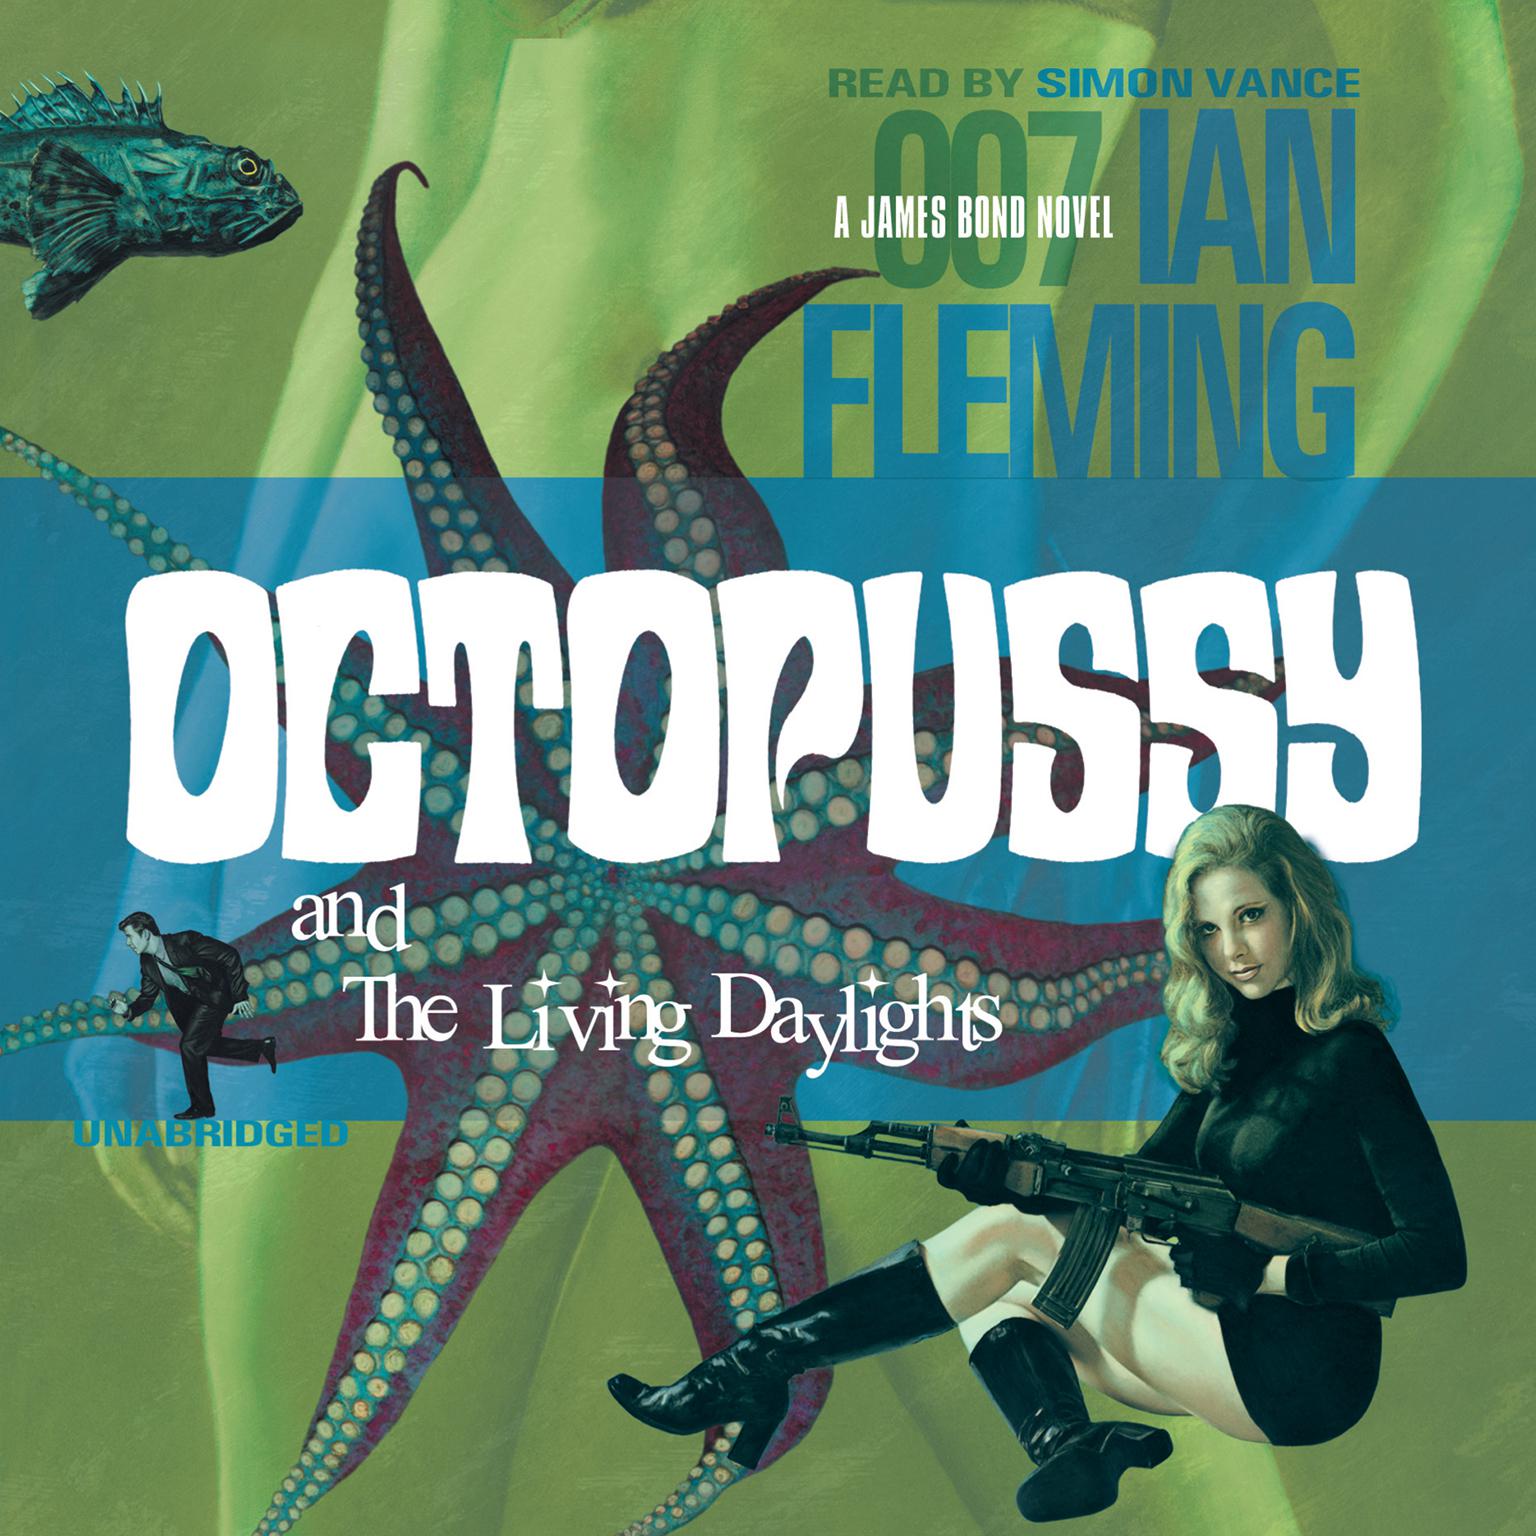 Octopussy and The Living Daylights Audiobook, by Ian Fleming